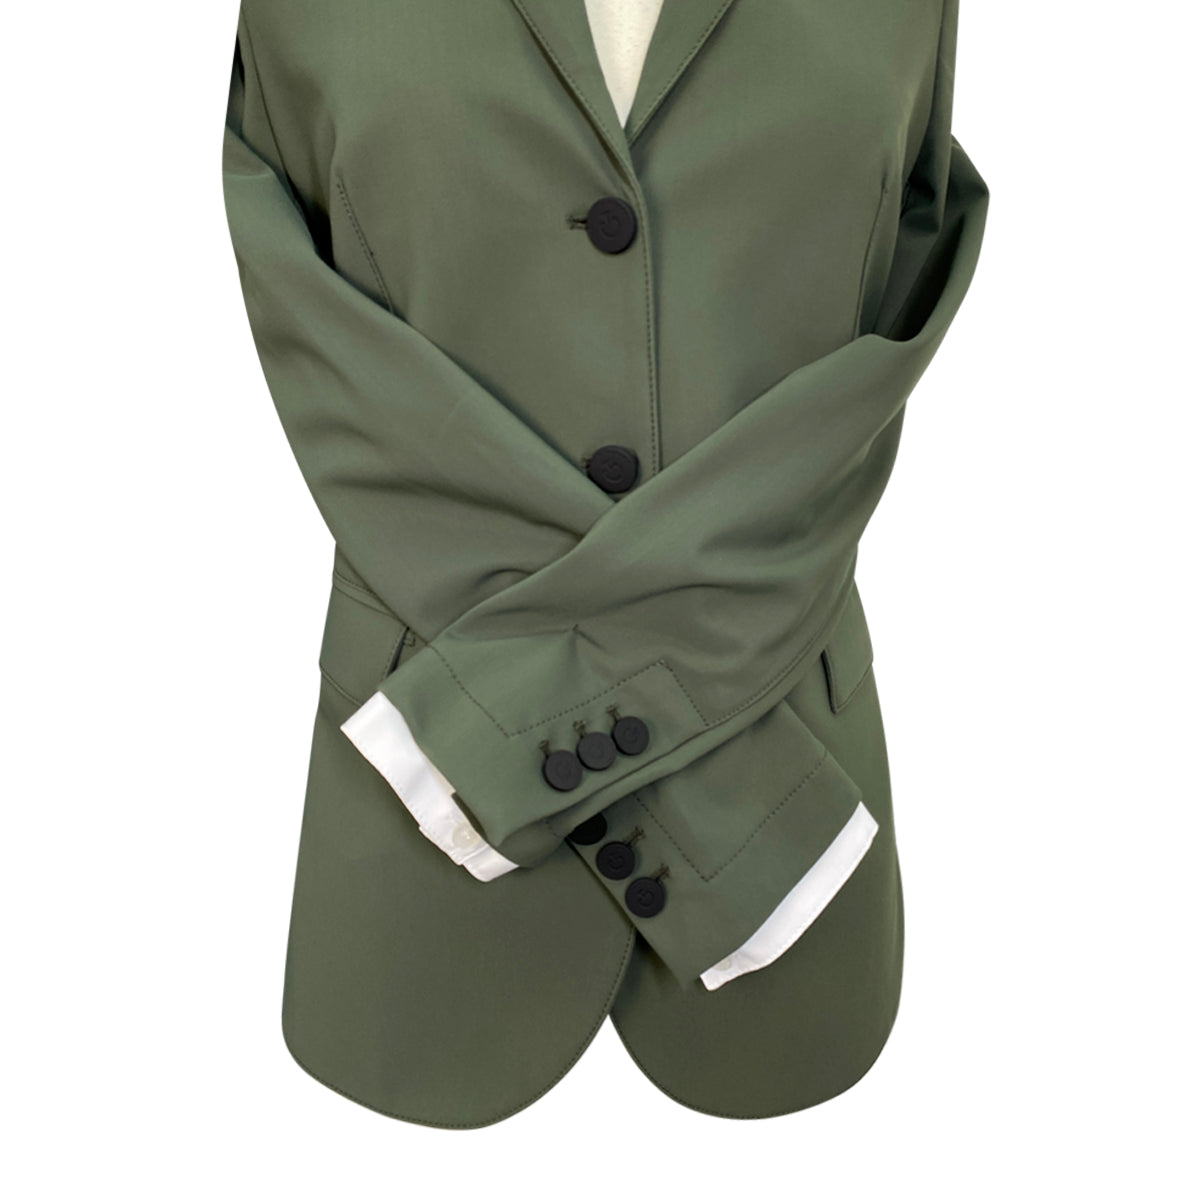 Cavalleria Toscana 'American' Competition Jacket in Forest Green